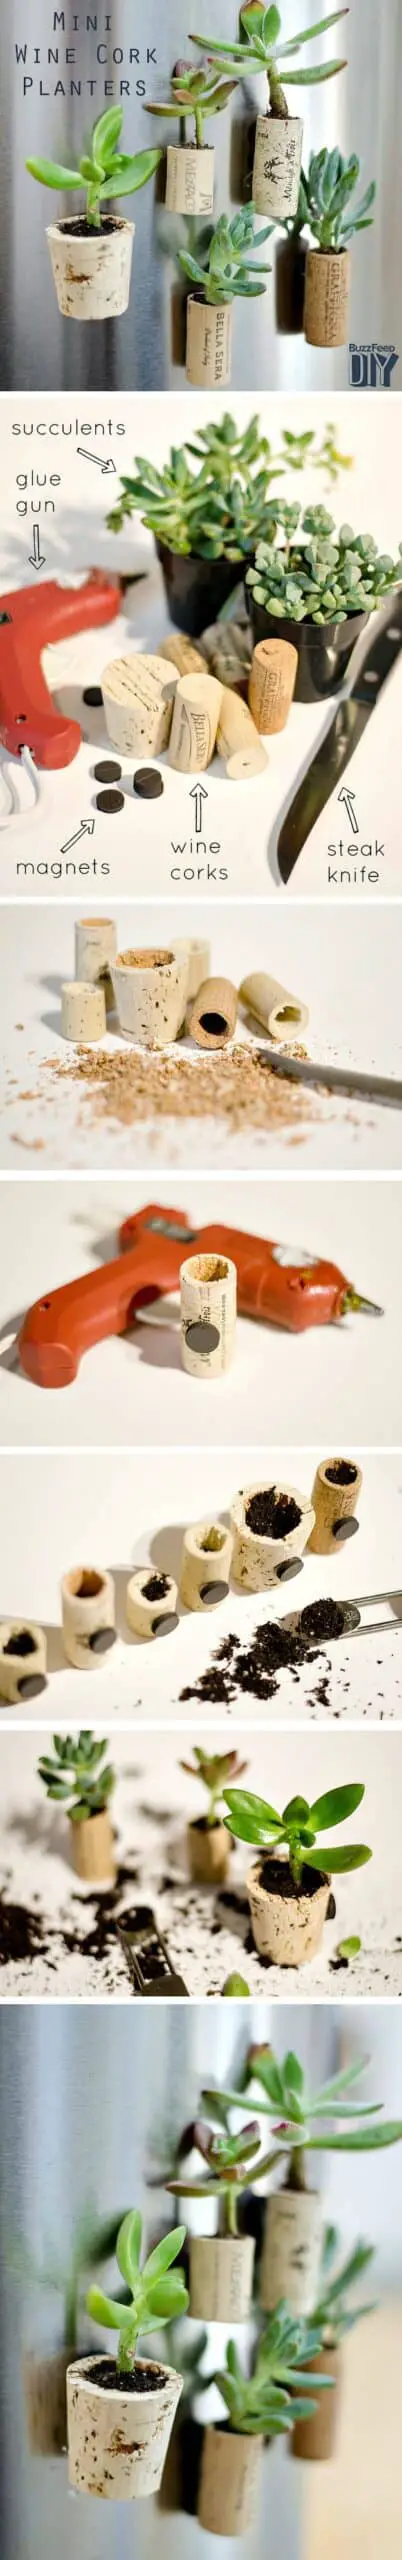 Diy: Tiny Planters From Upcycled Wine Corks 15 - tutorial